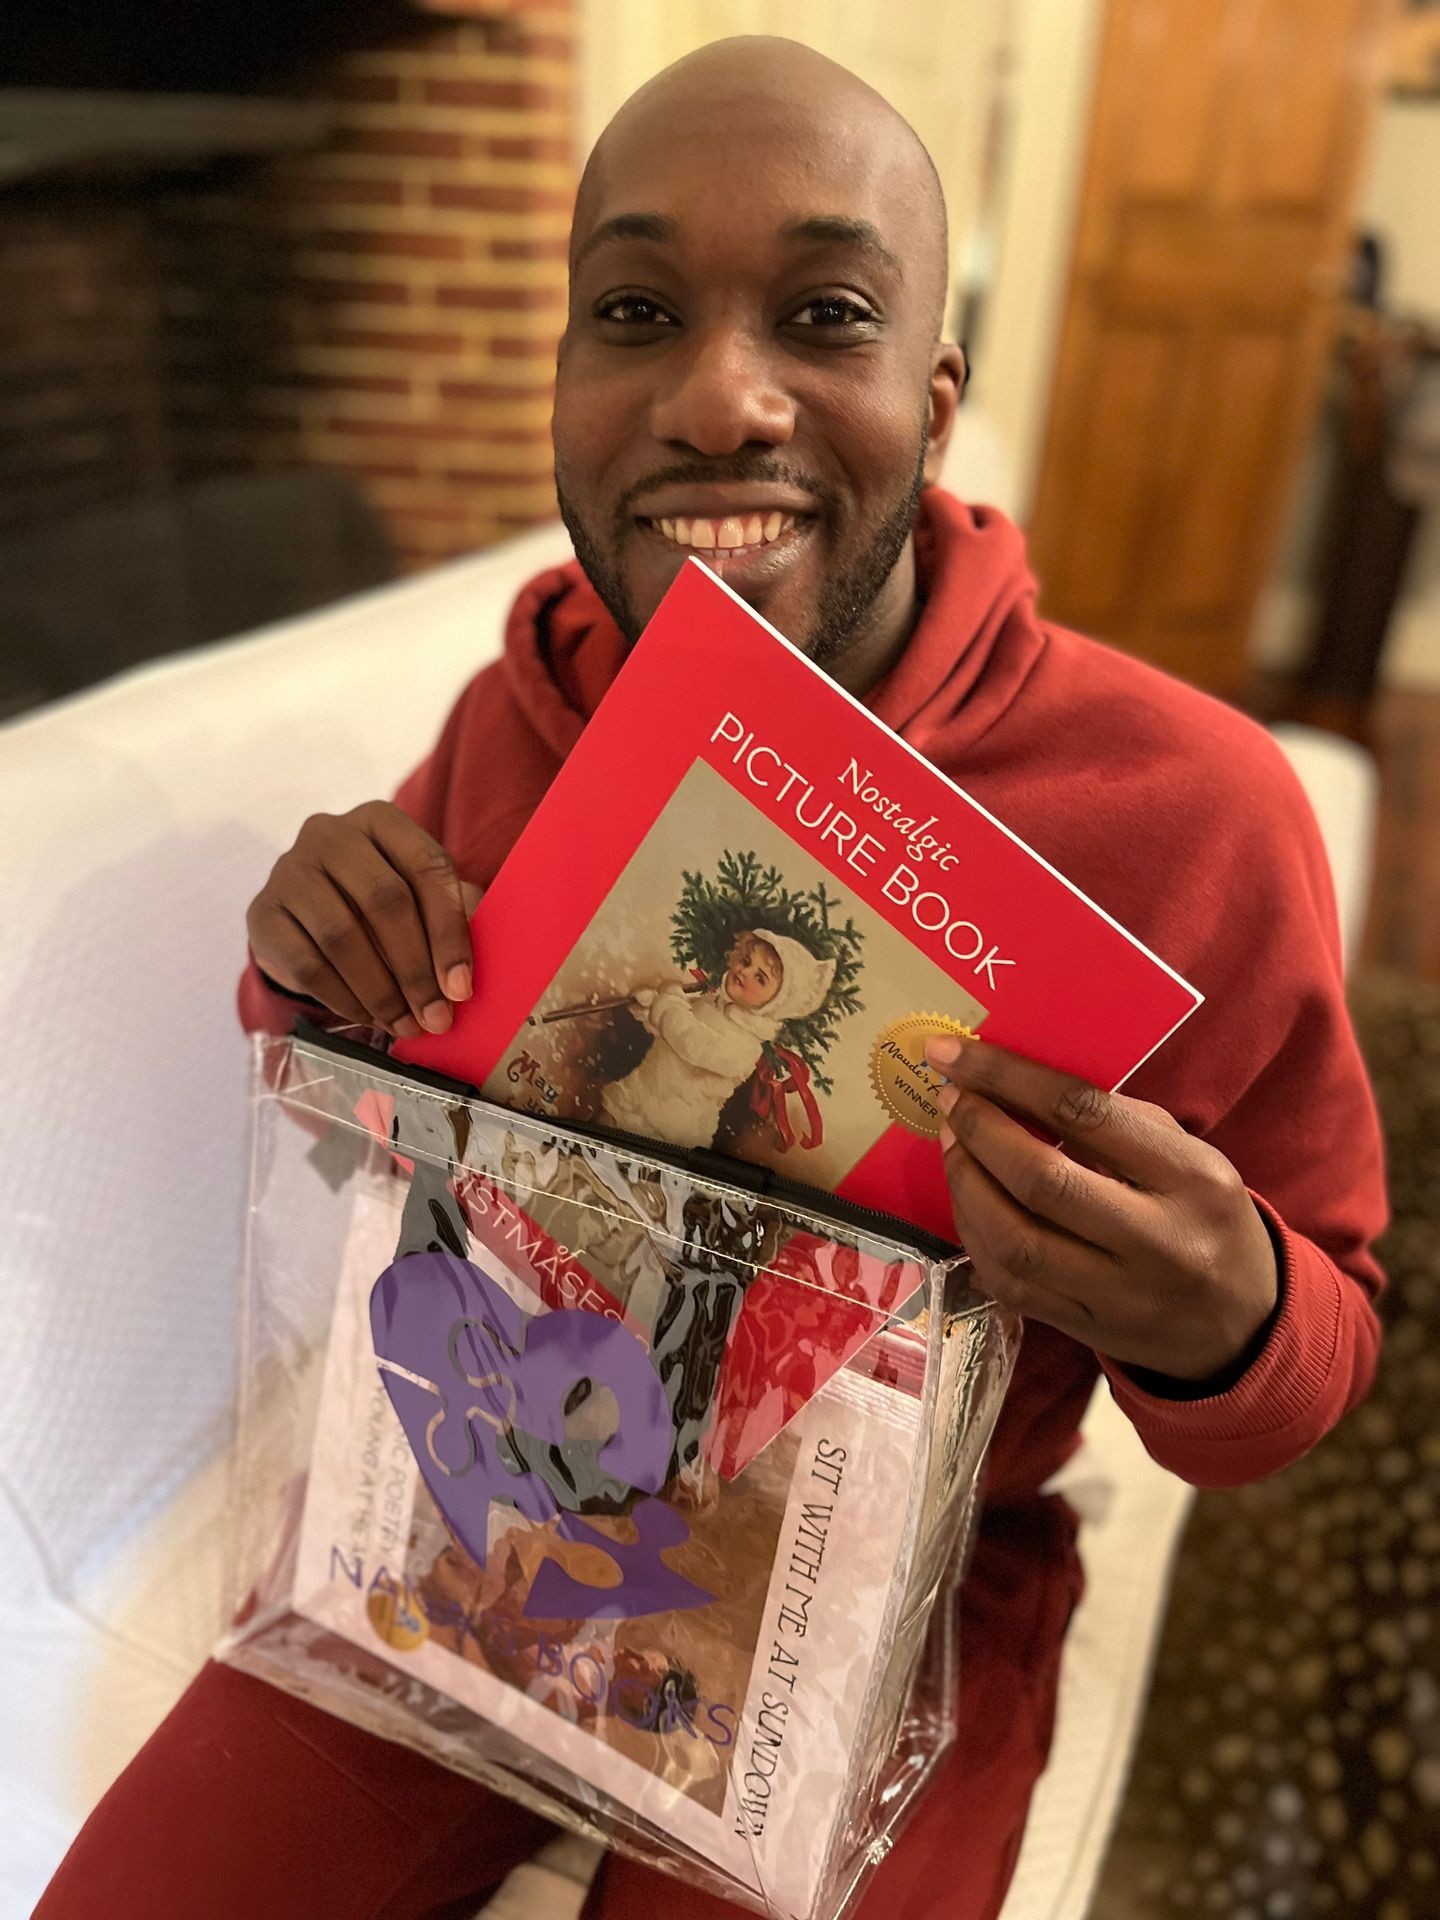 A young African American man in a red sweatshirt smiles as he unpacks a clear tote of Nostalgic Holiday books to share with a loved one in long term care. He is bald and sits contentedly near a brick fireplace.